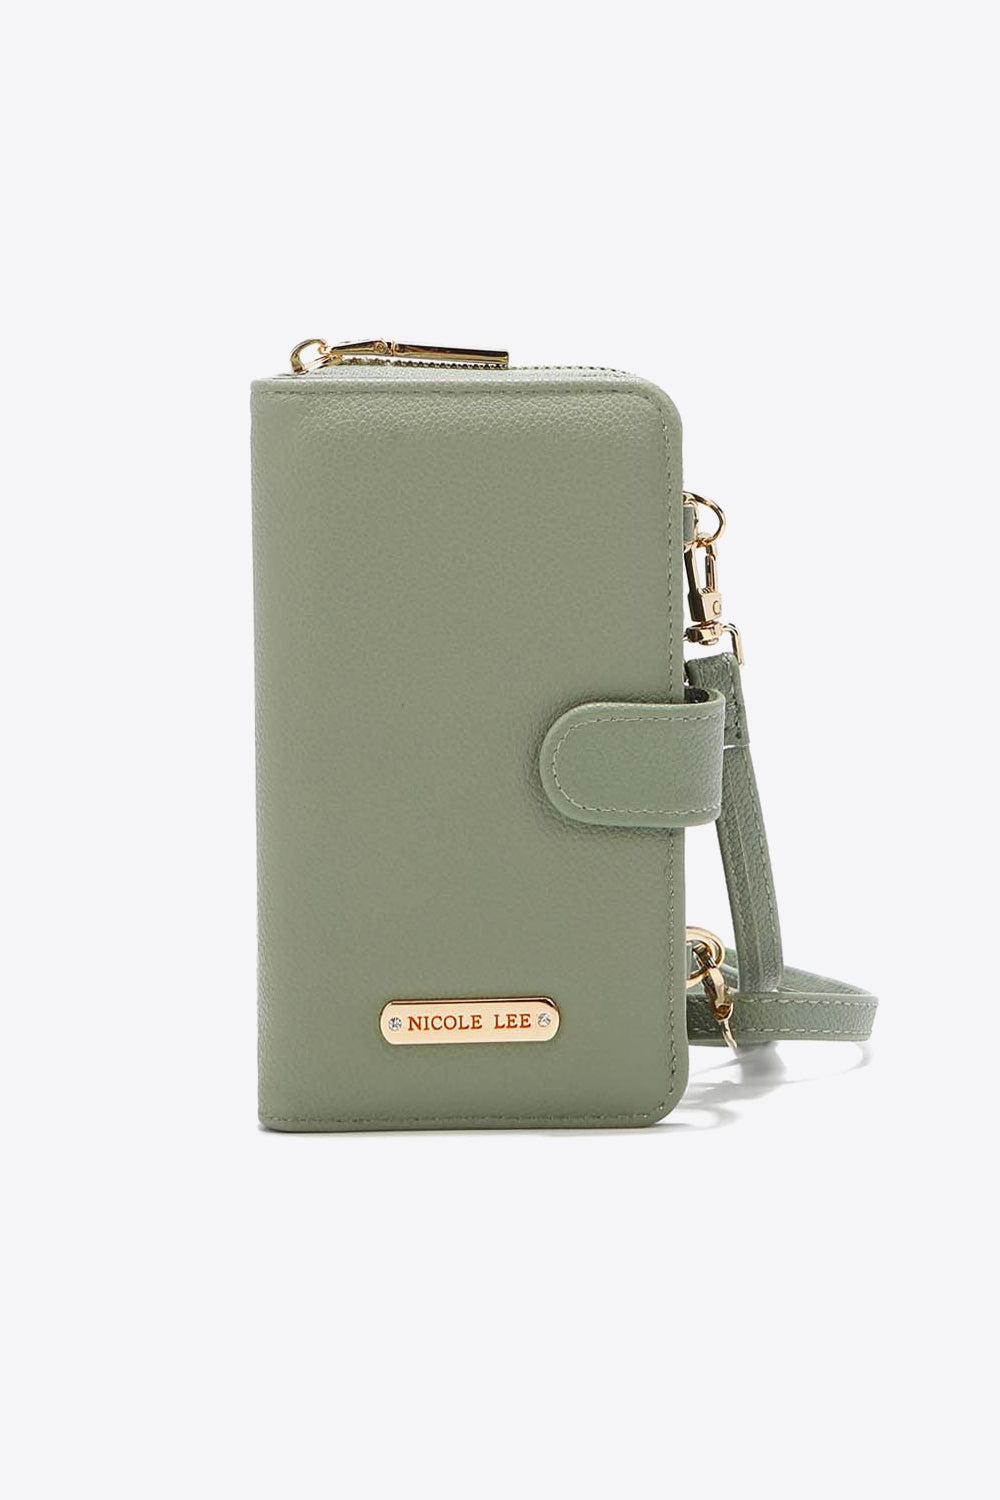 Nicole Lee USA Two-Piece Crossbody Phone Case Wallet Bags & Luggage - Women's Bags - Top-Handle Bags RYSE Clothing Co. Sage One Size 